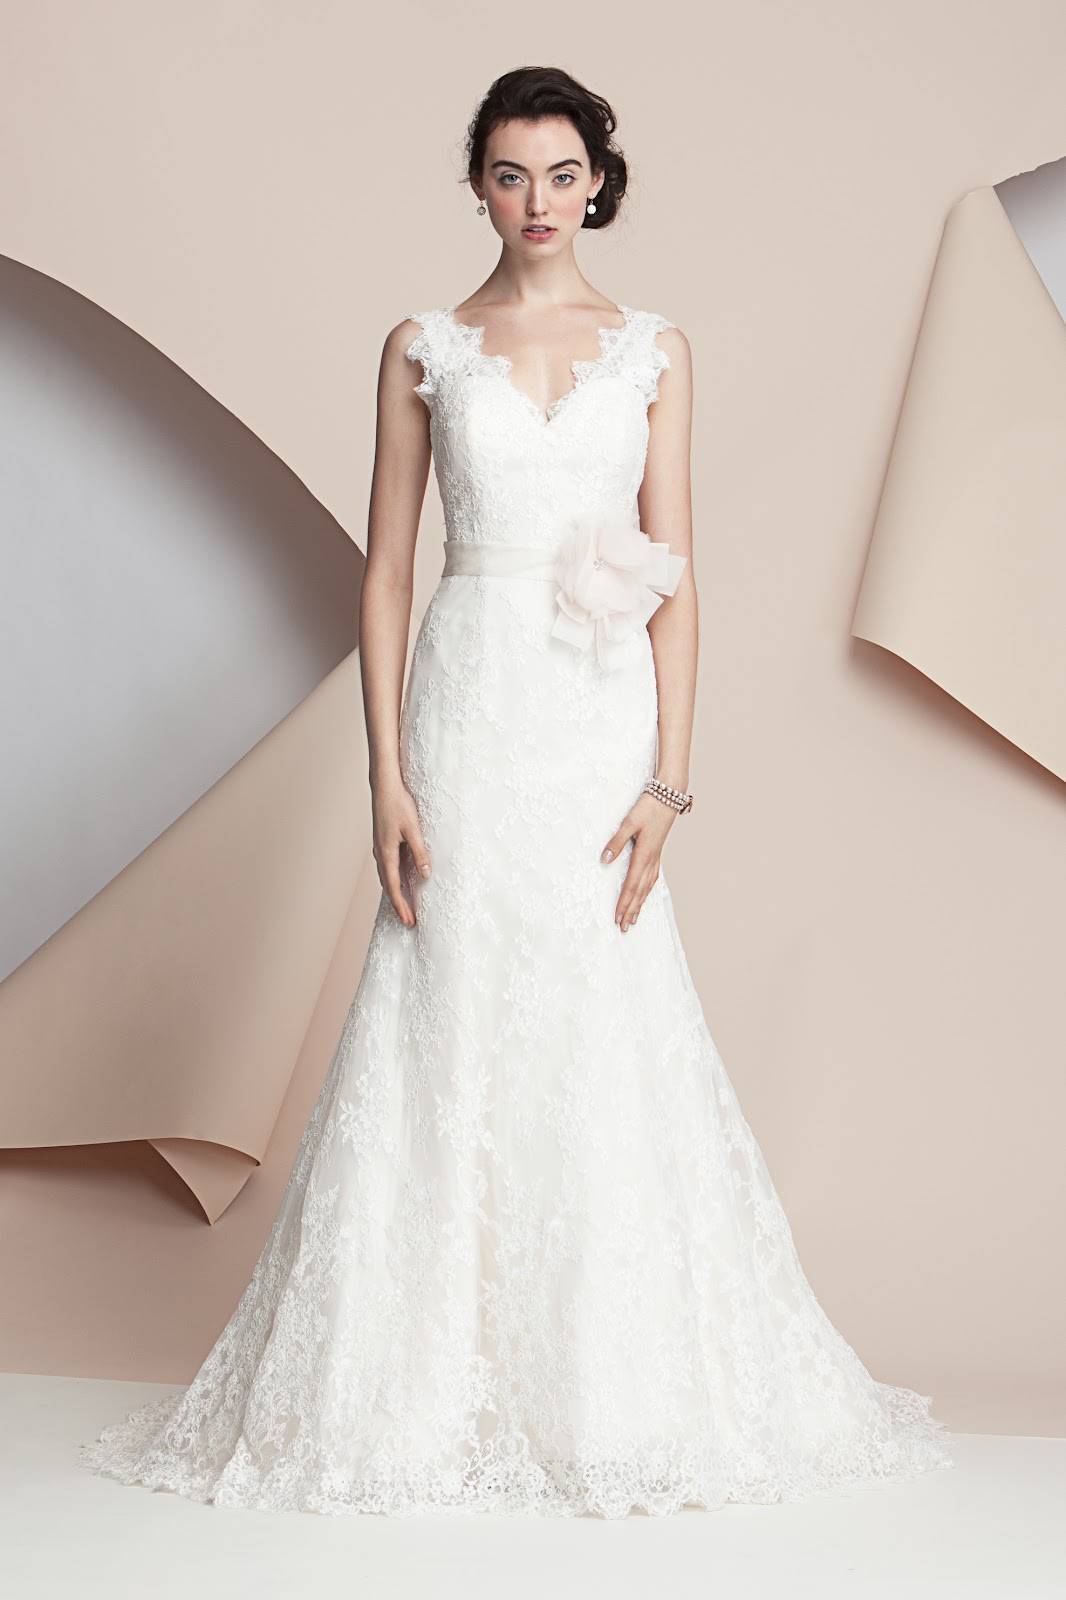 wedding dresses with lace back We Love Lace (Wedding Gowns)!